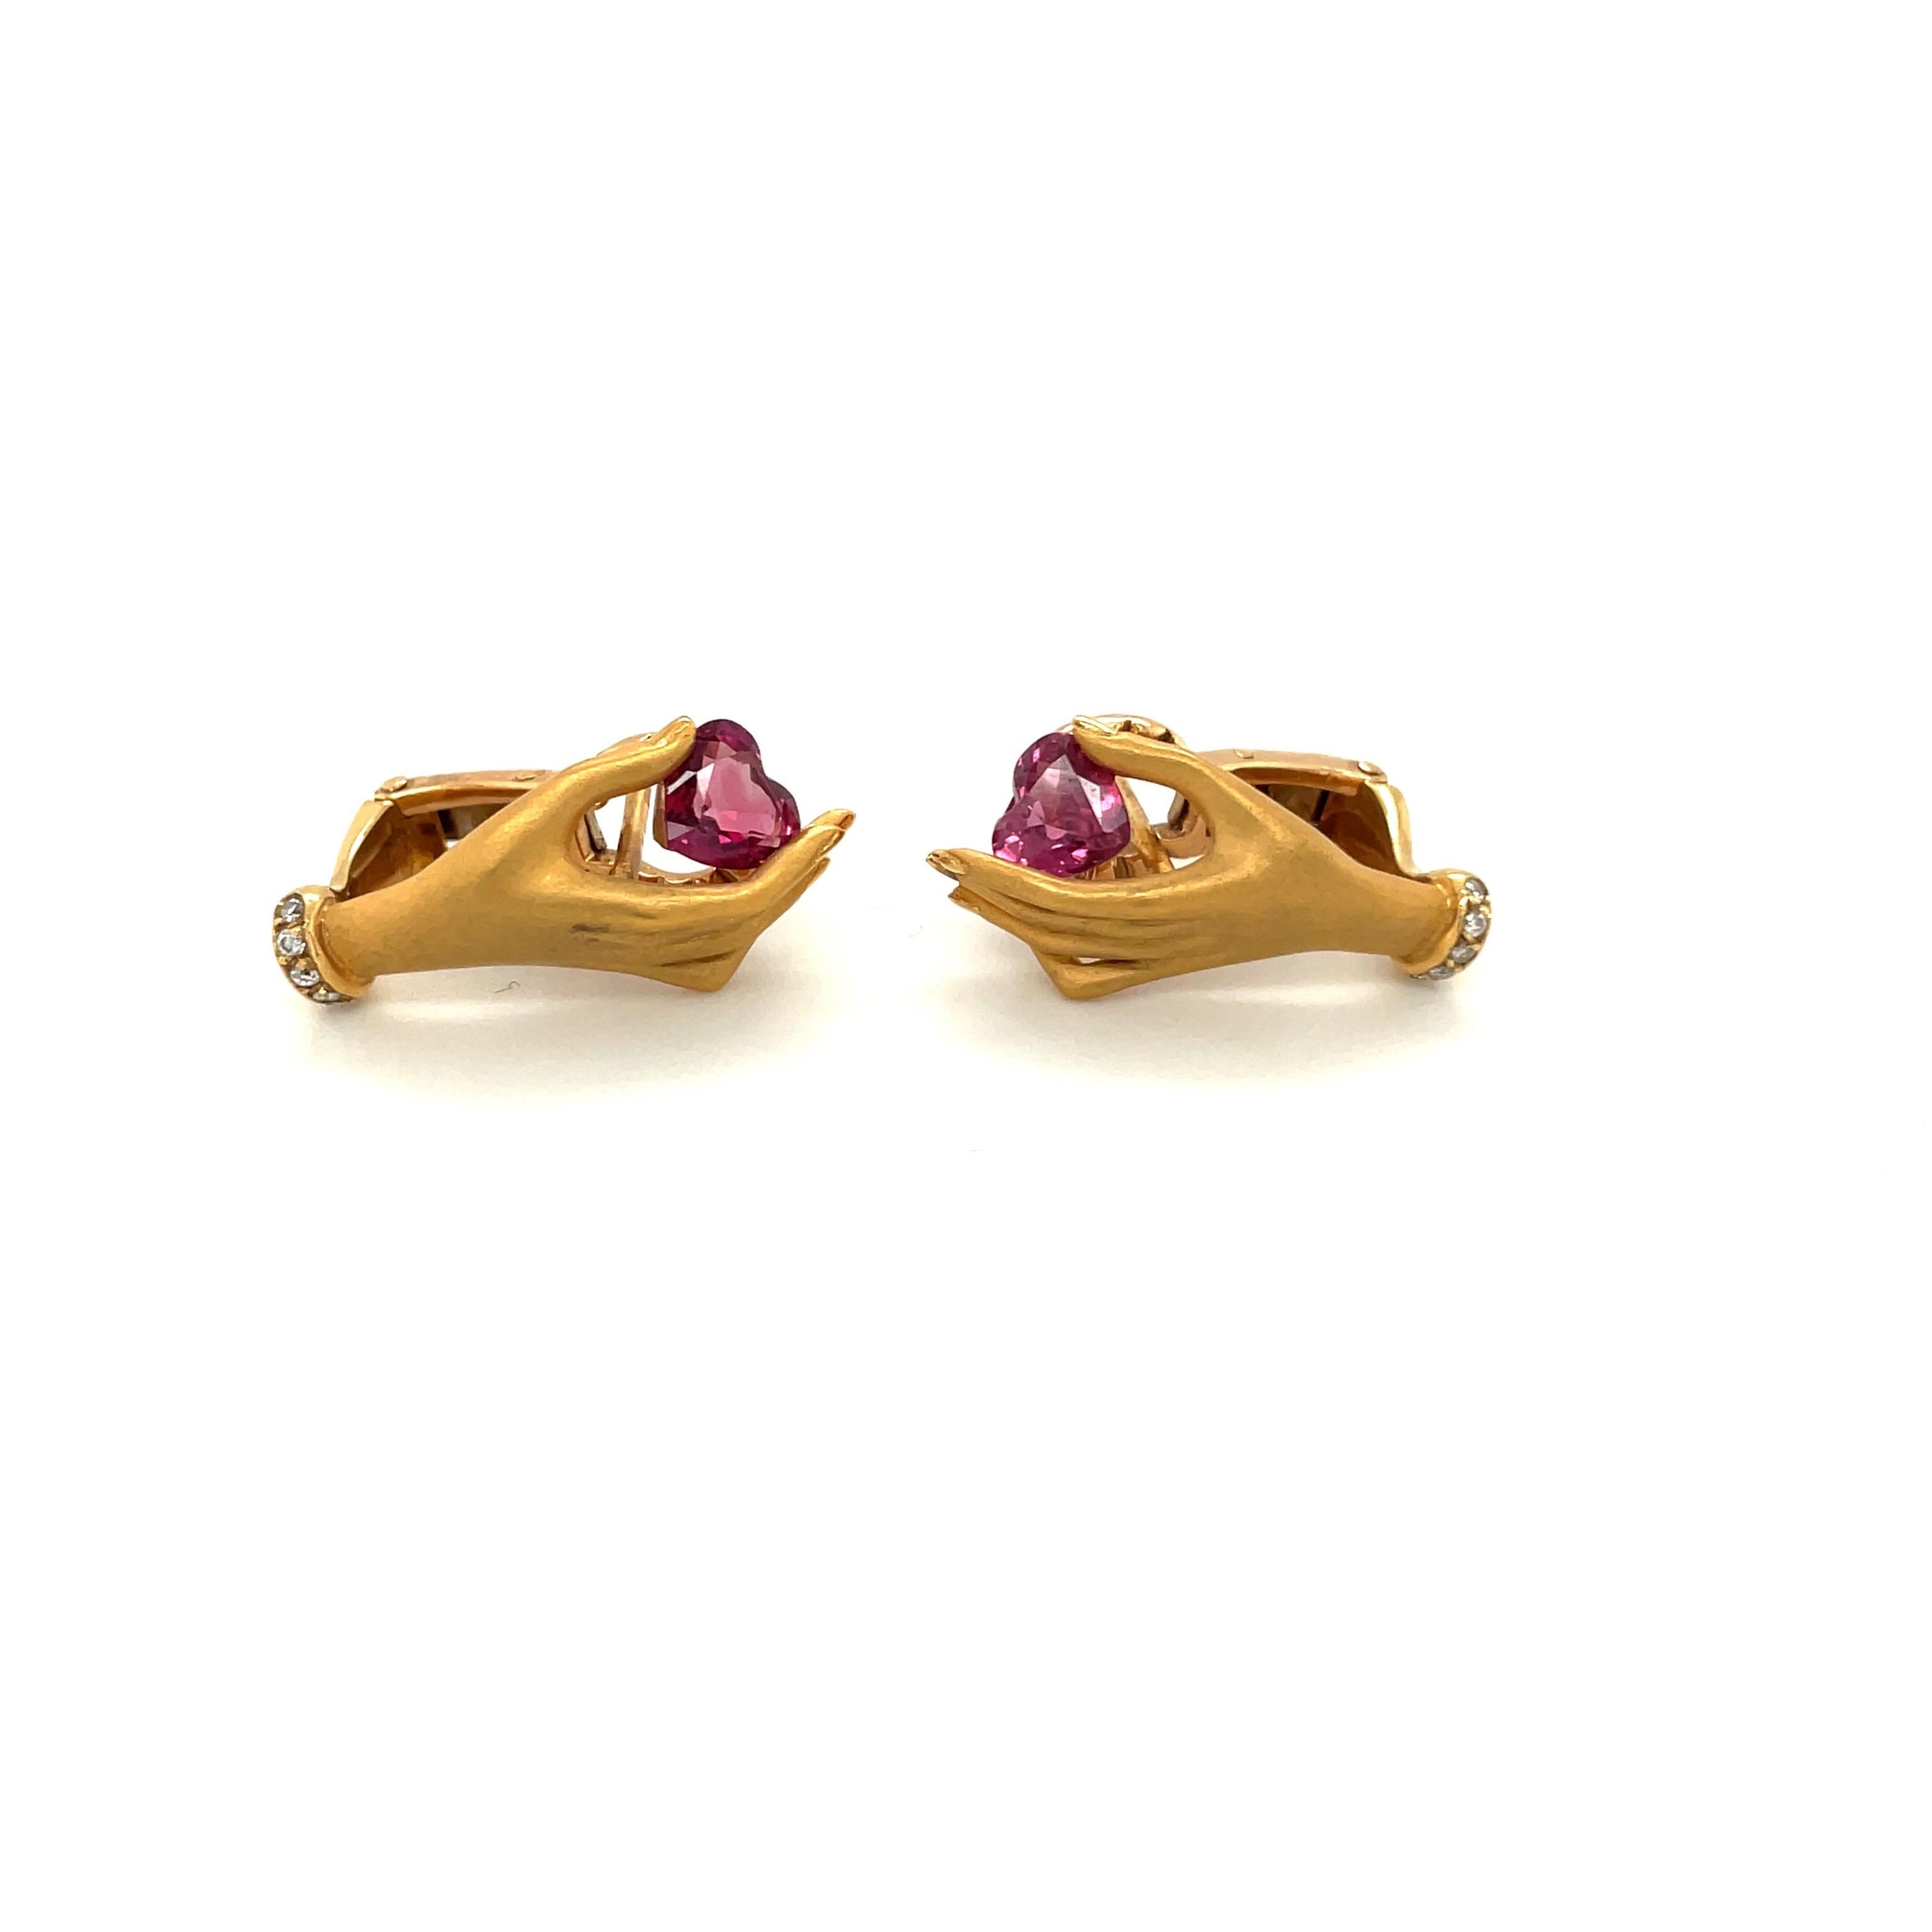 Contemporary Carrera Y Carrera 18 KT YG Hand Earrings 1.40Ct Ruby Heart .06Ct Diamond For Sale